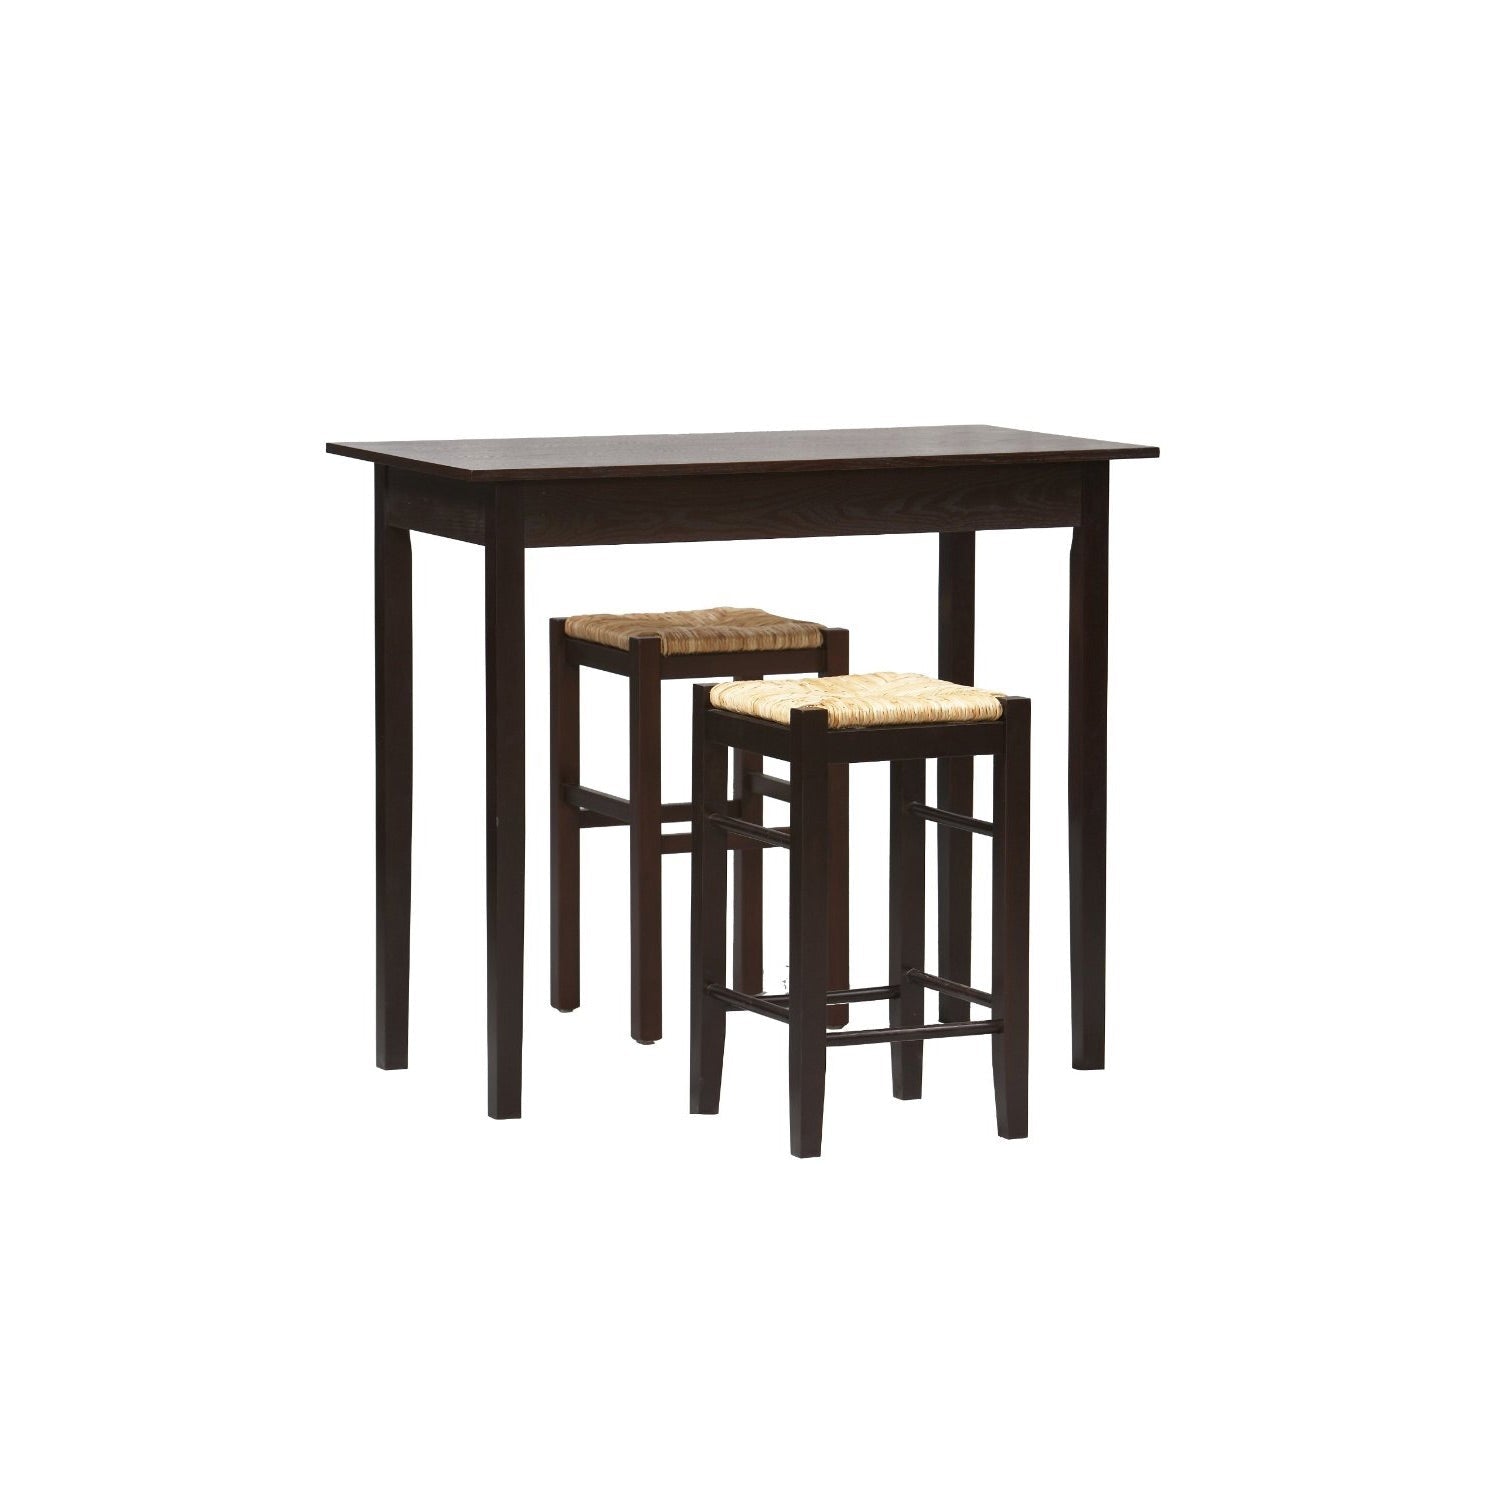 Dining > Dining Sets - 3 Piece Espresso Dining Set With Table And 2 Backless Stools